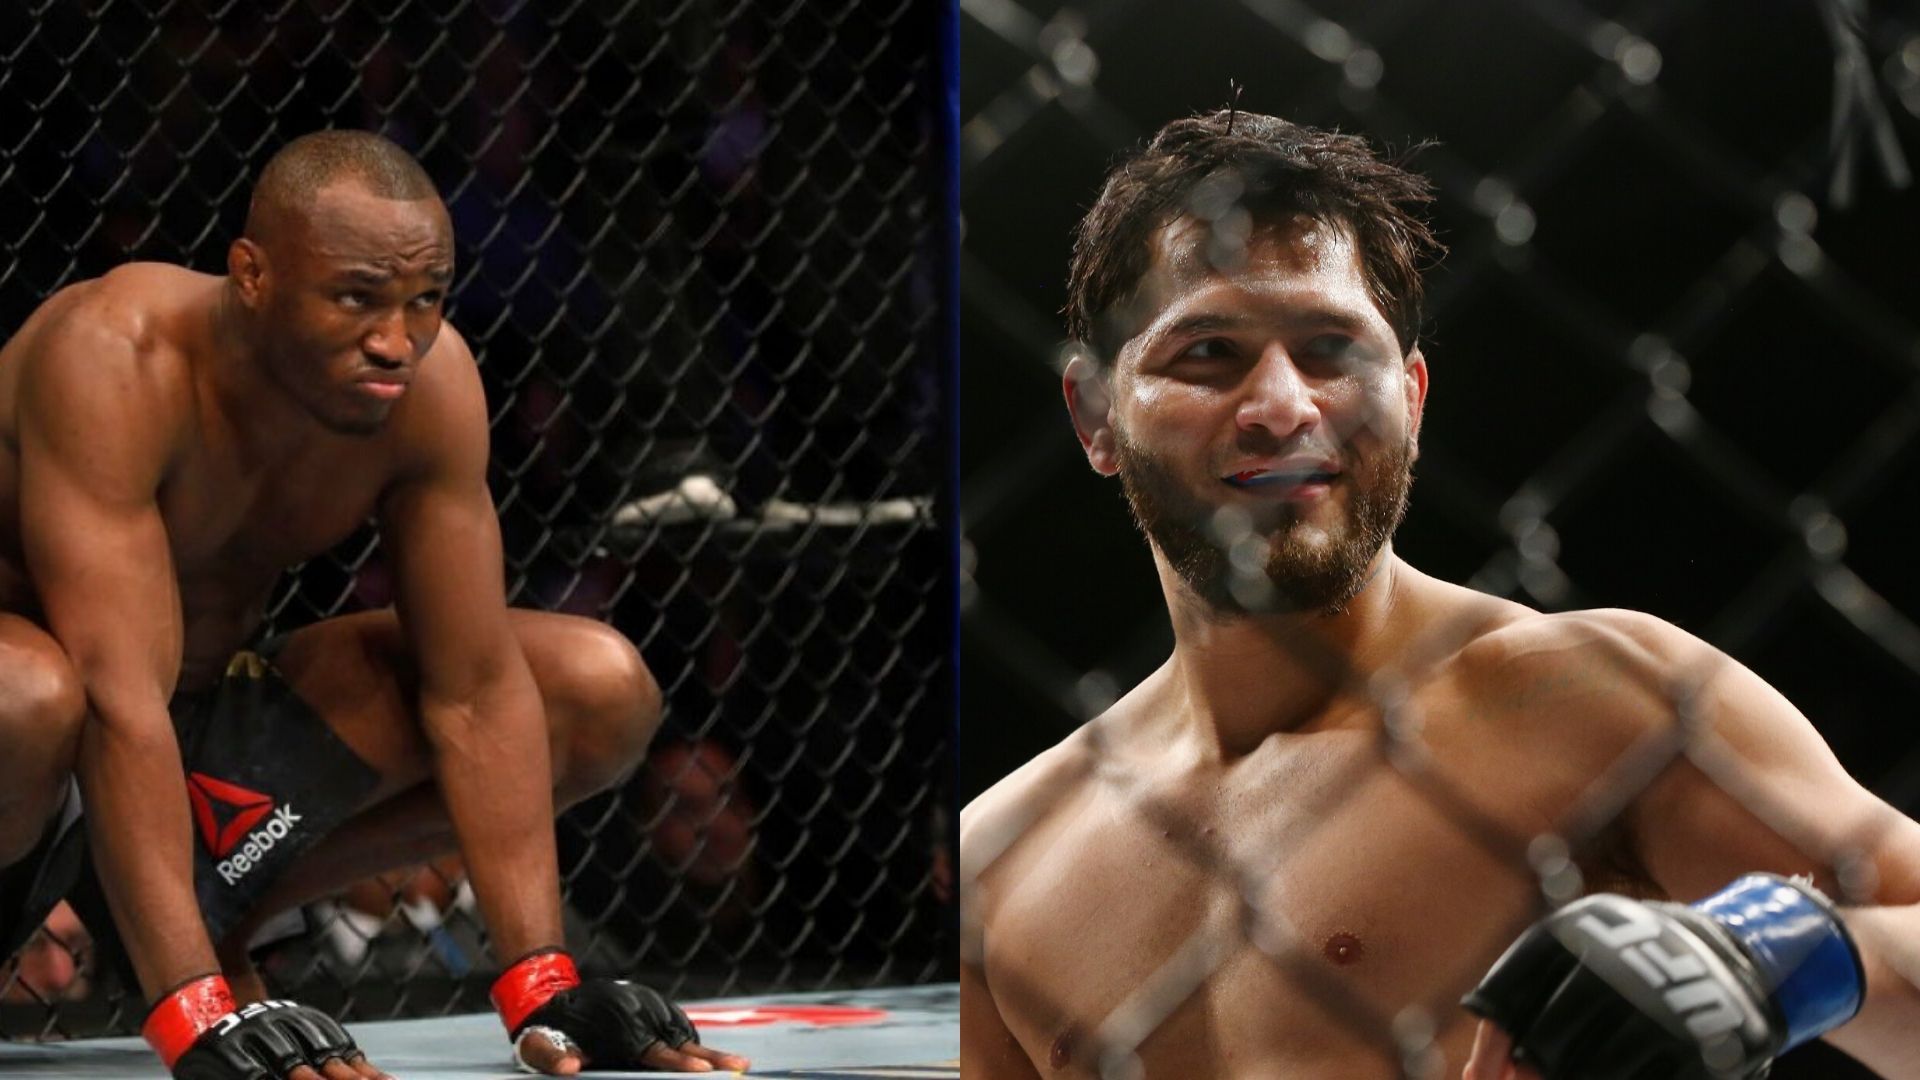 Jorge Masvidal vs Kamaru Usman should be one of the greatest UFC fights of the year